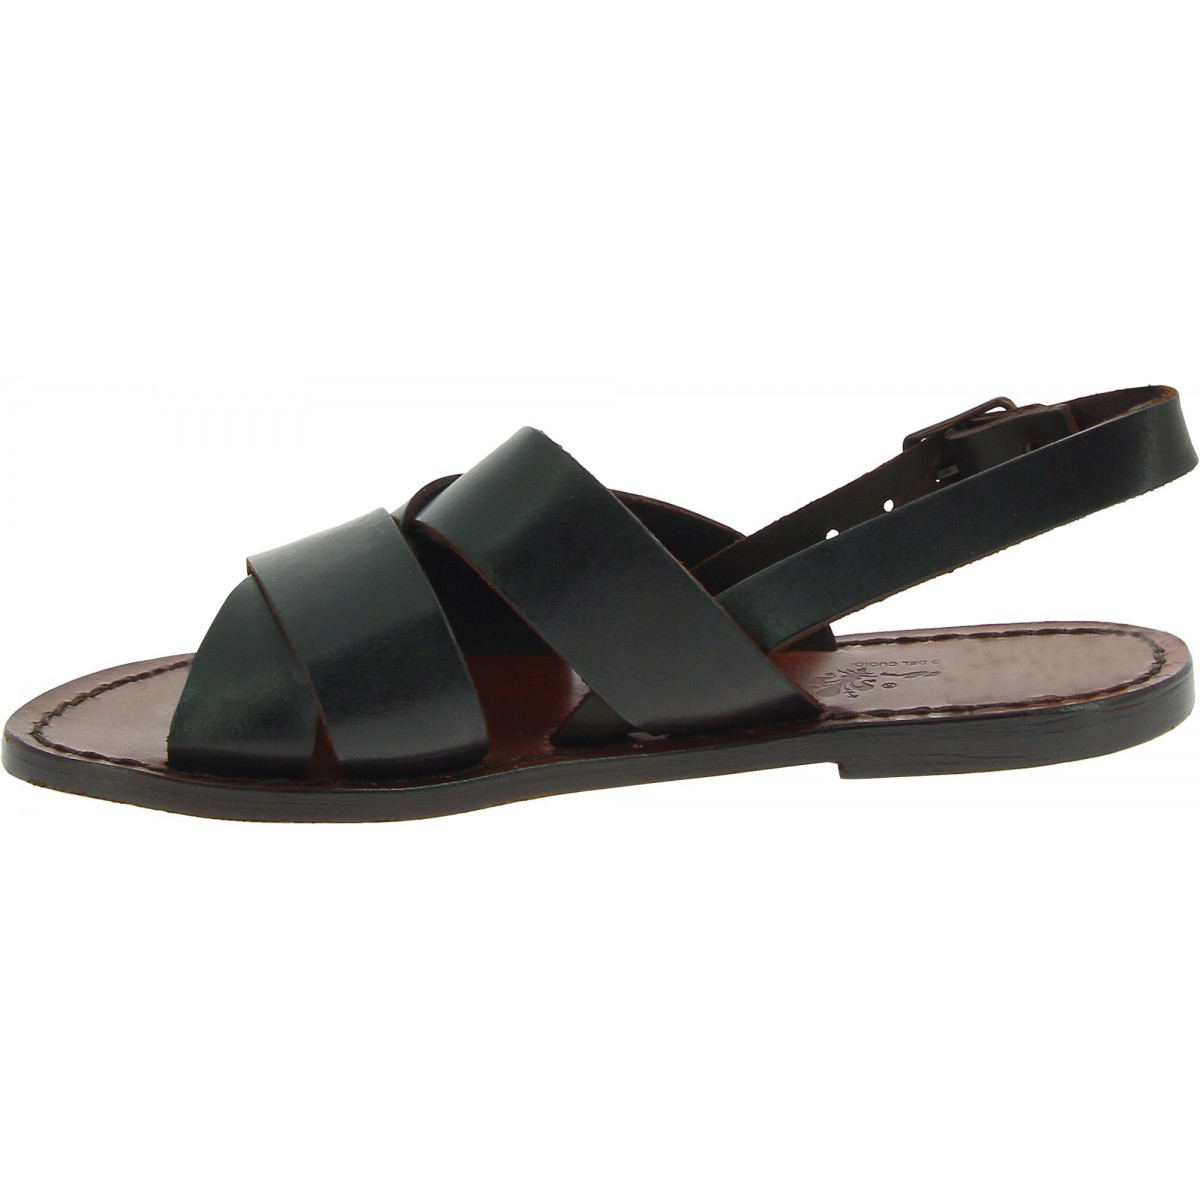 Brown leather franciscan sandals for women handmade in Italy | The ...